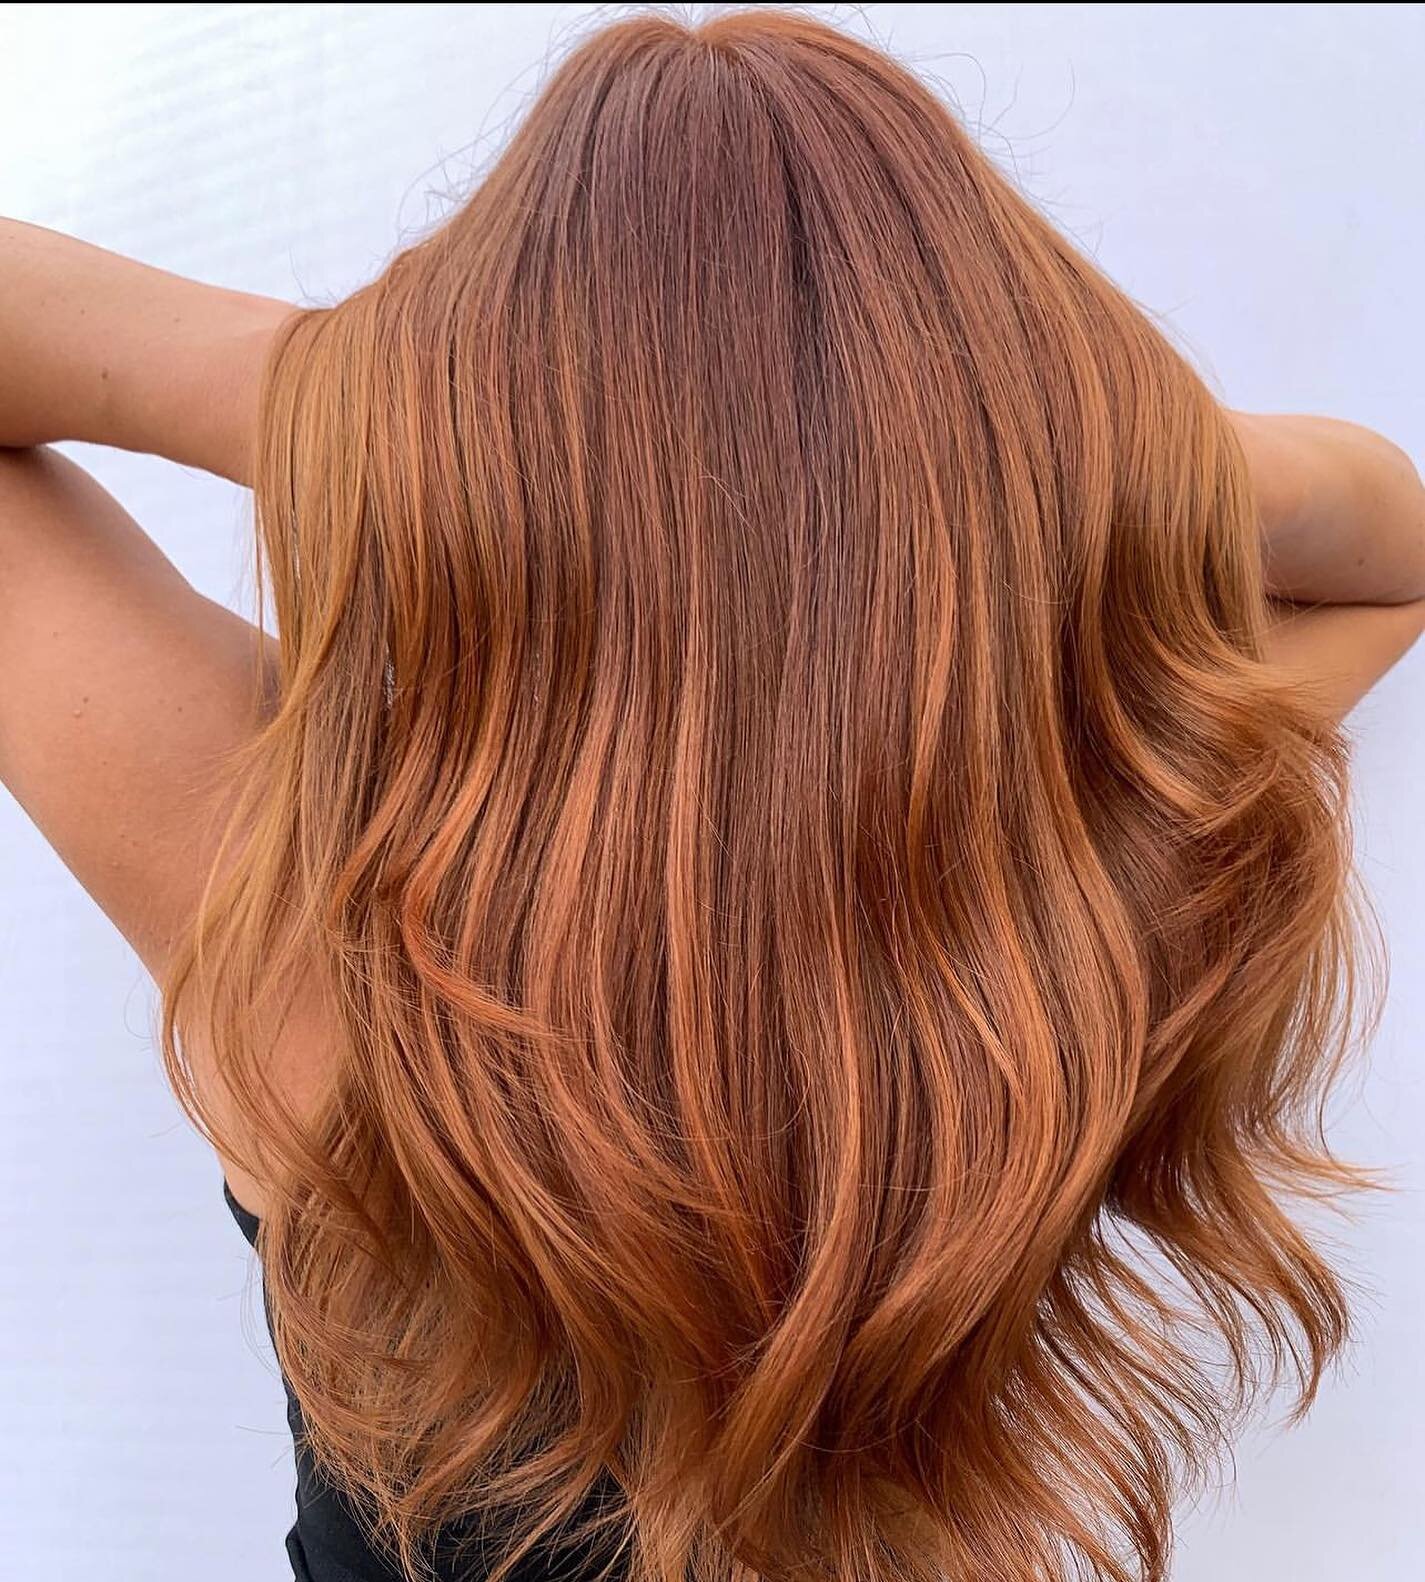 🤠 excuse me while we interrupt this feed. #cowboycopper

hair by: @sarahdidmyhair

#thegoldenvanity #toledohairstylist #midwesthairstylist #bowlinggreenhairstylist